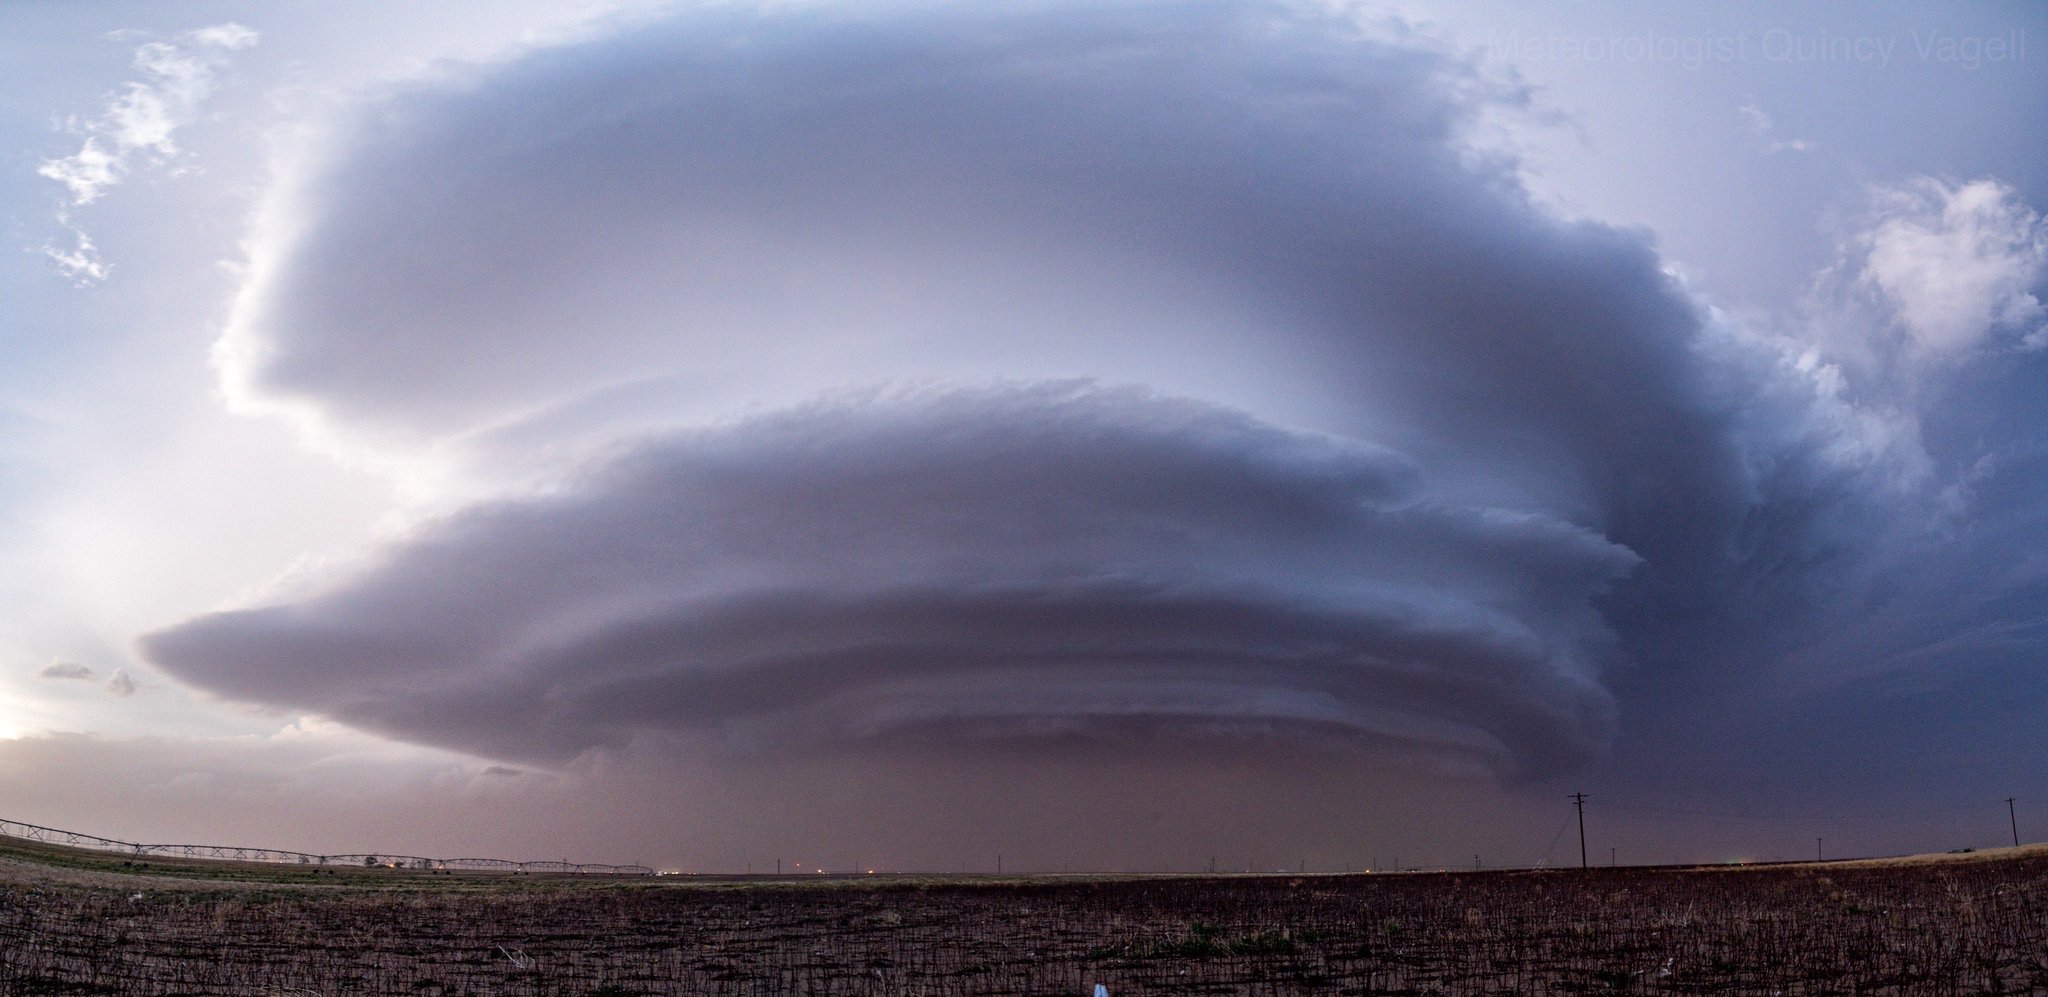 Supercell (rotating) thunderstorm near Levelland Monday evening (23 May 2022). The picture is courtesy of Quincy Vagell.